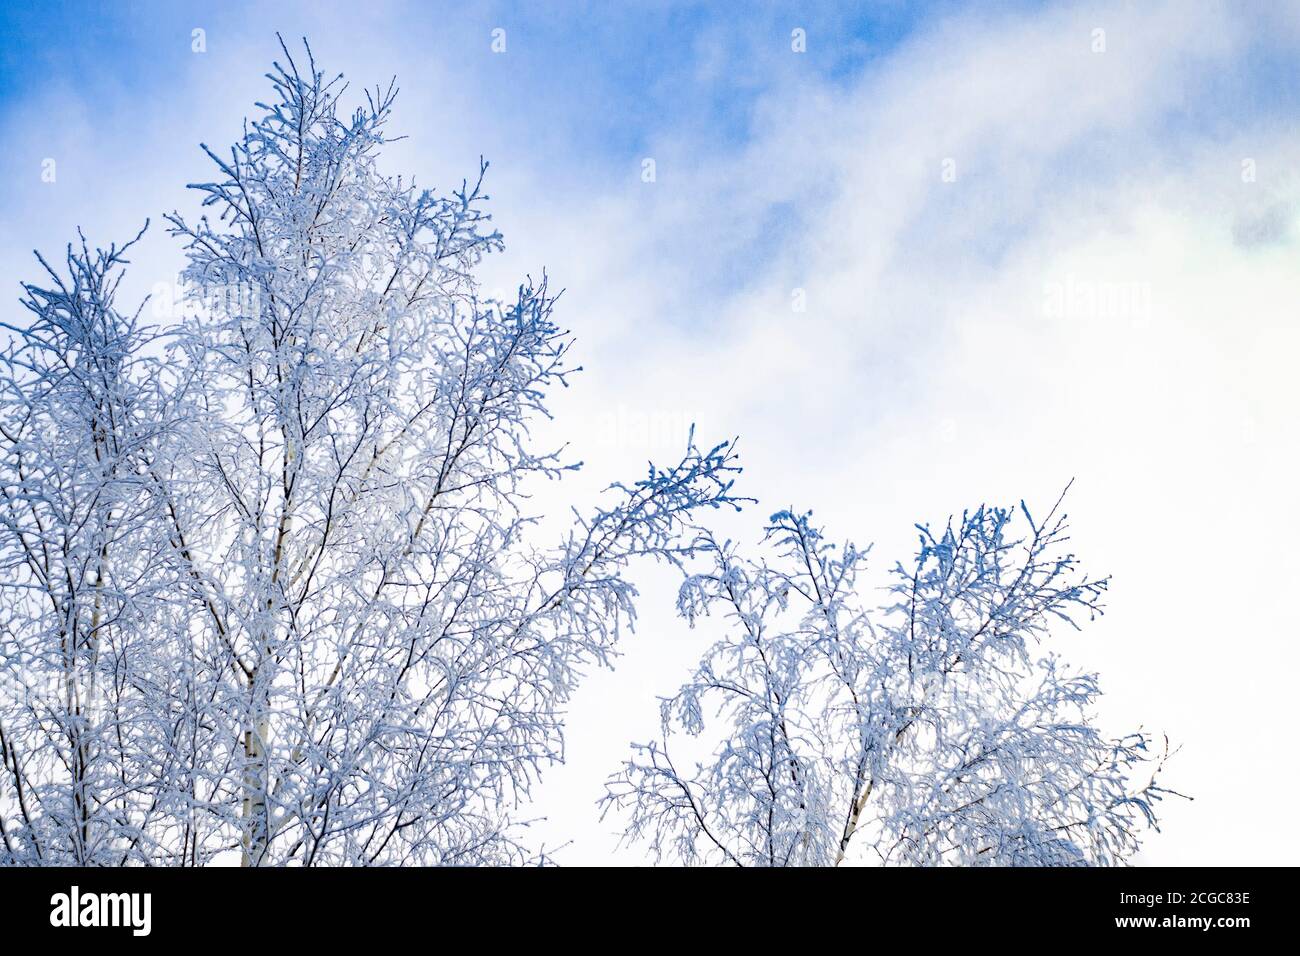 Snow-covered birch trees in other. View from front in Siberia Stock Photo